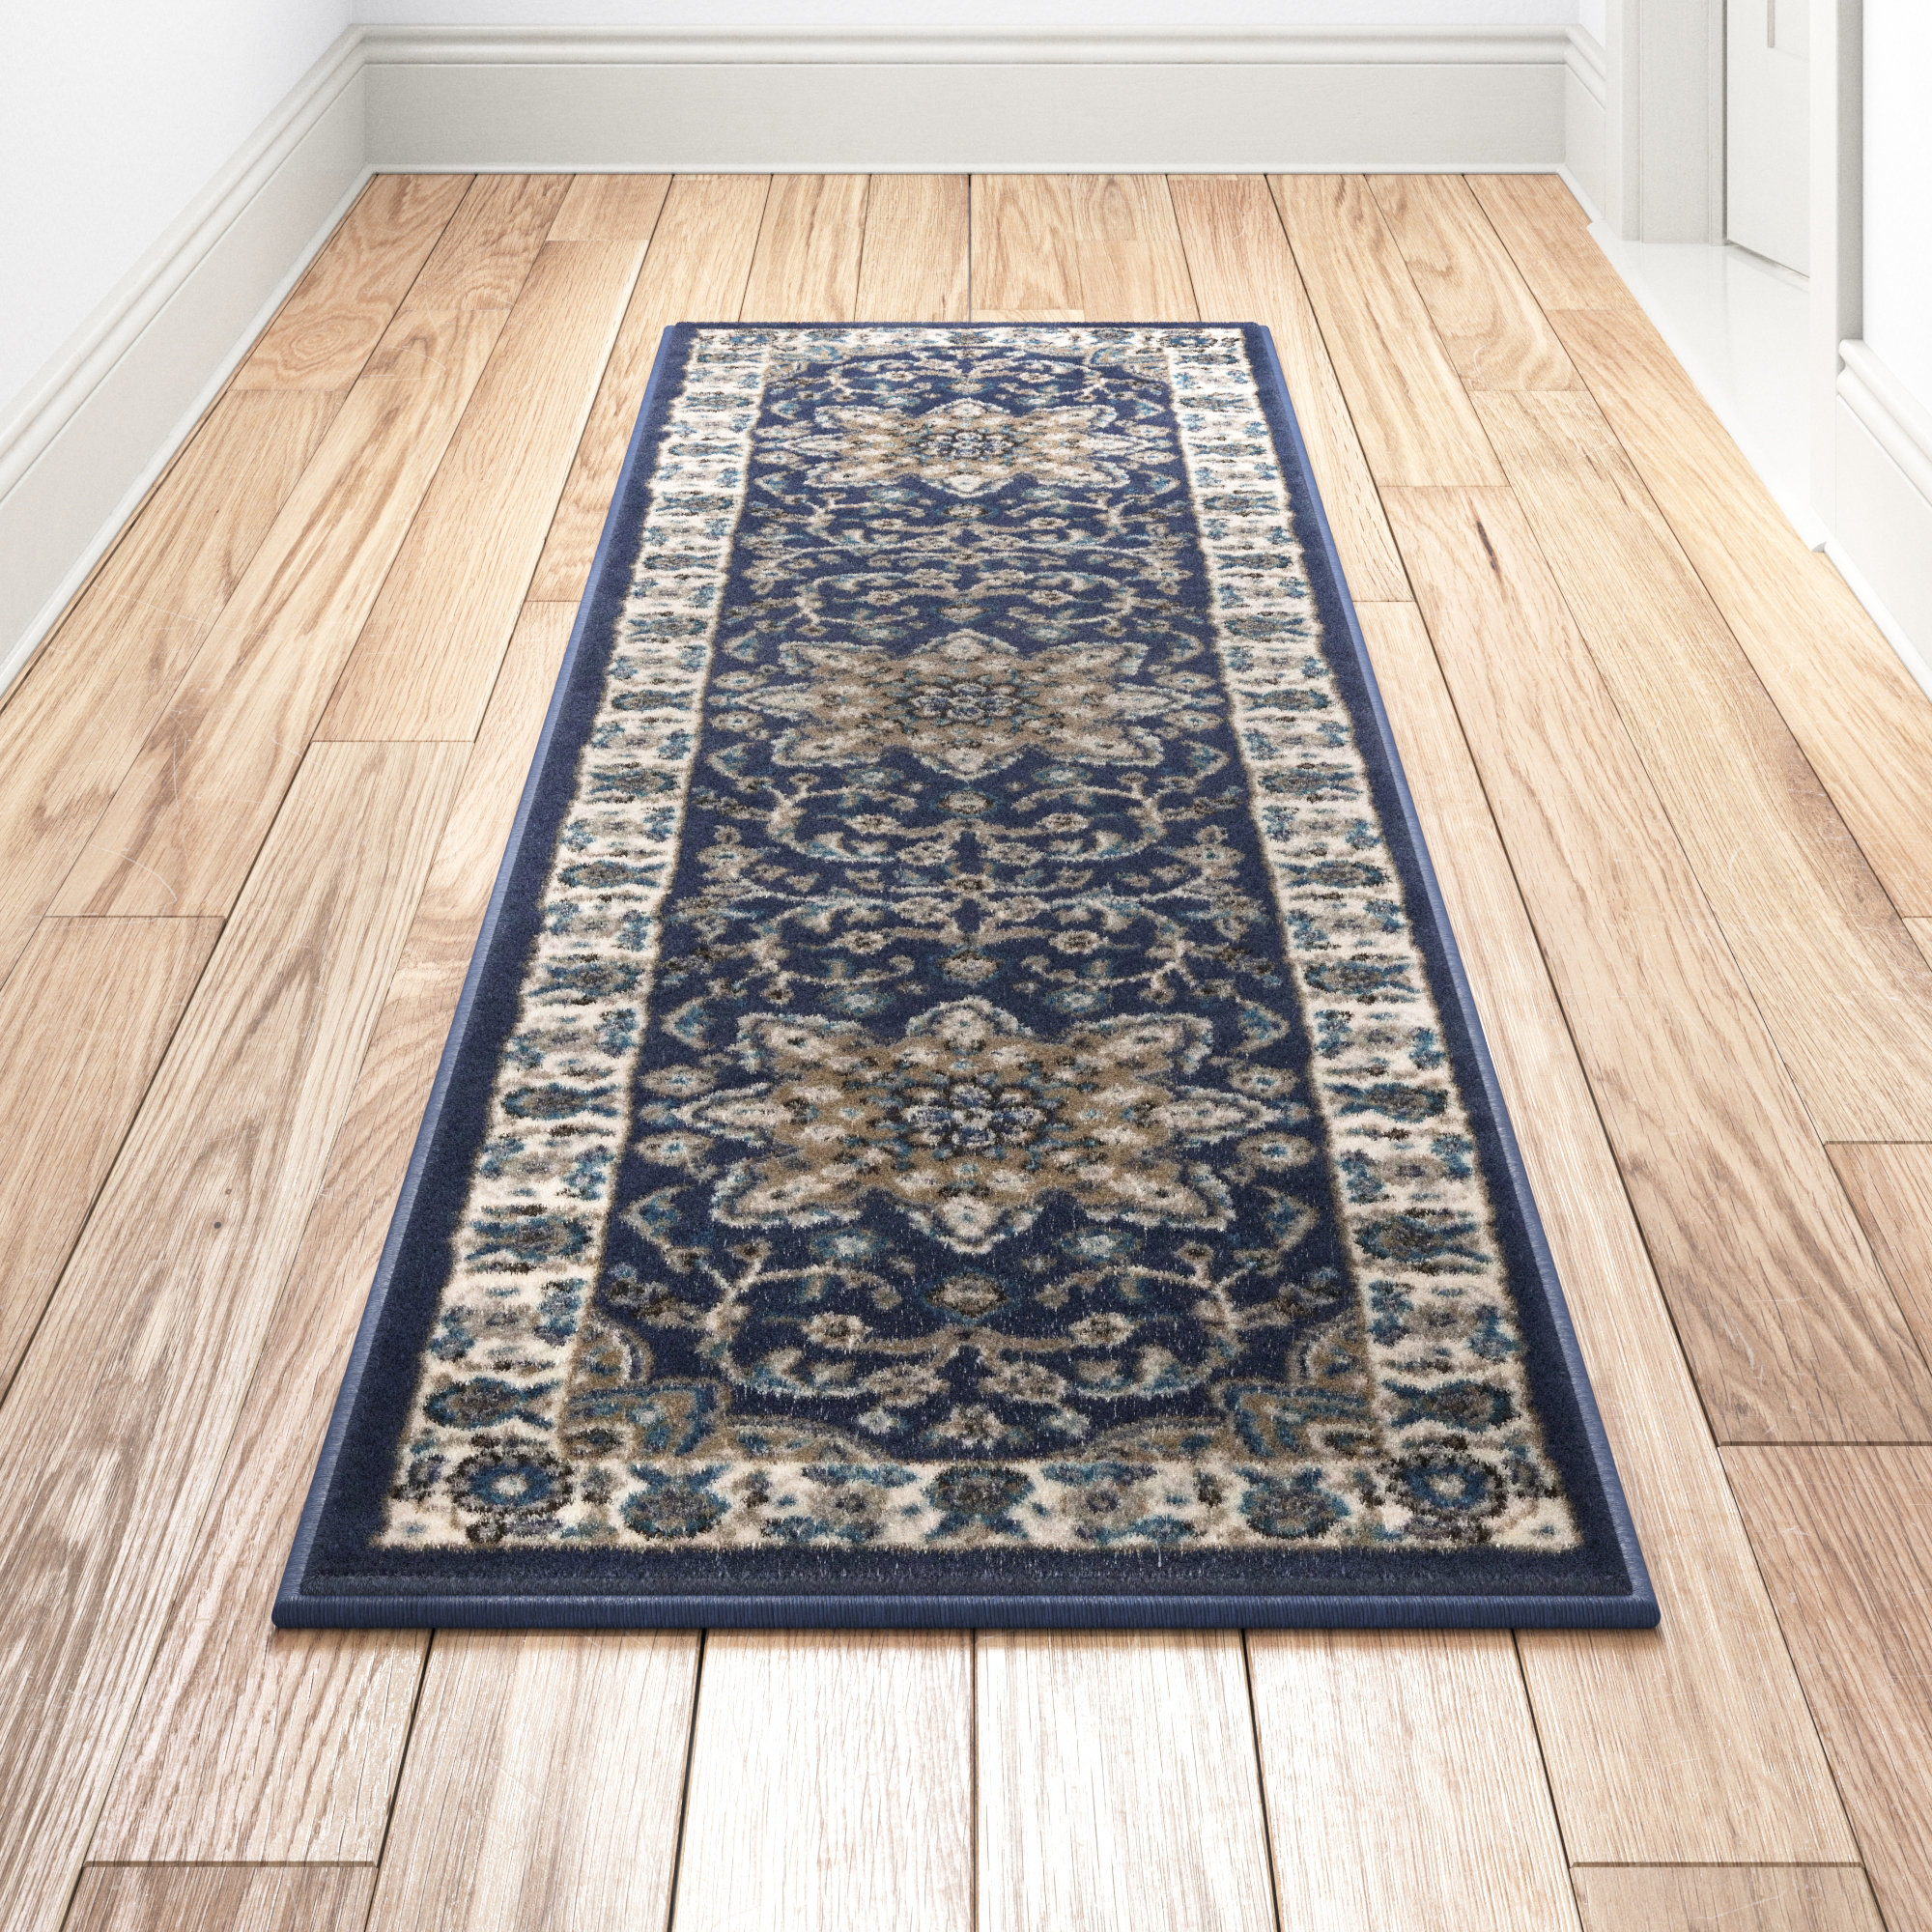 Top 7 Best Rug Pads for Hardwood Floors/Carpet & Stairs [Review